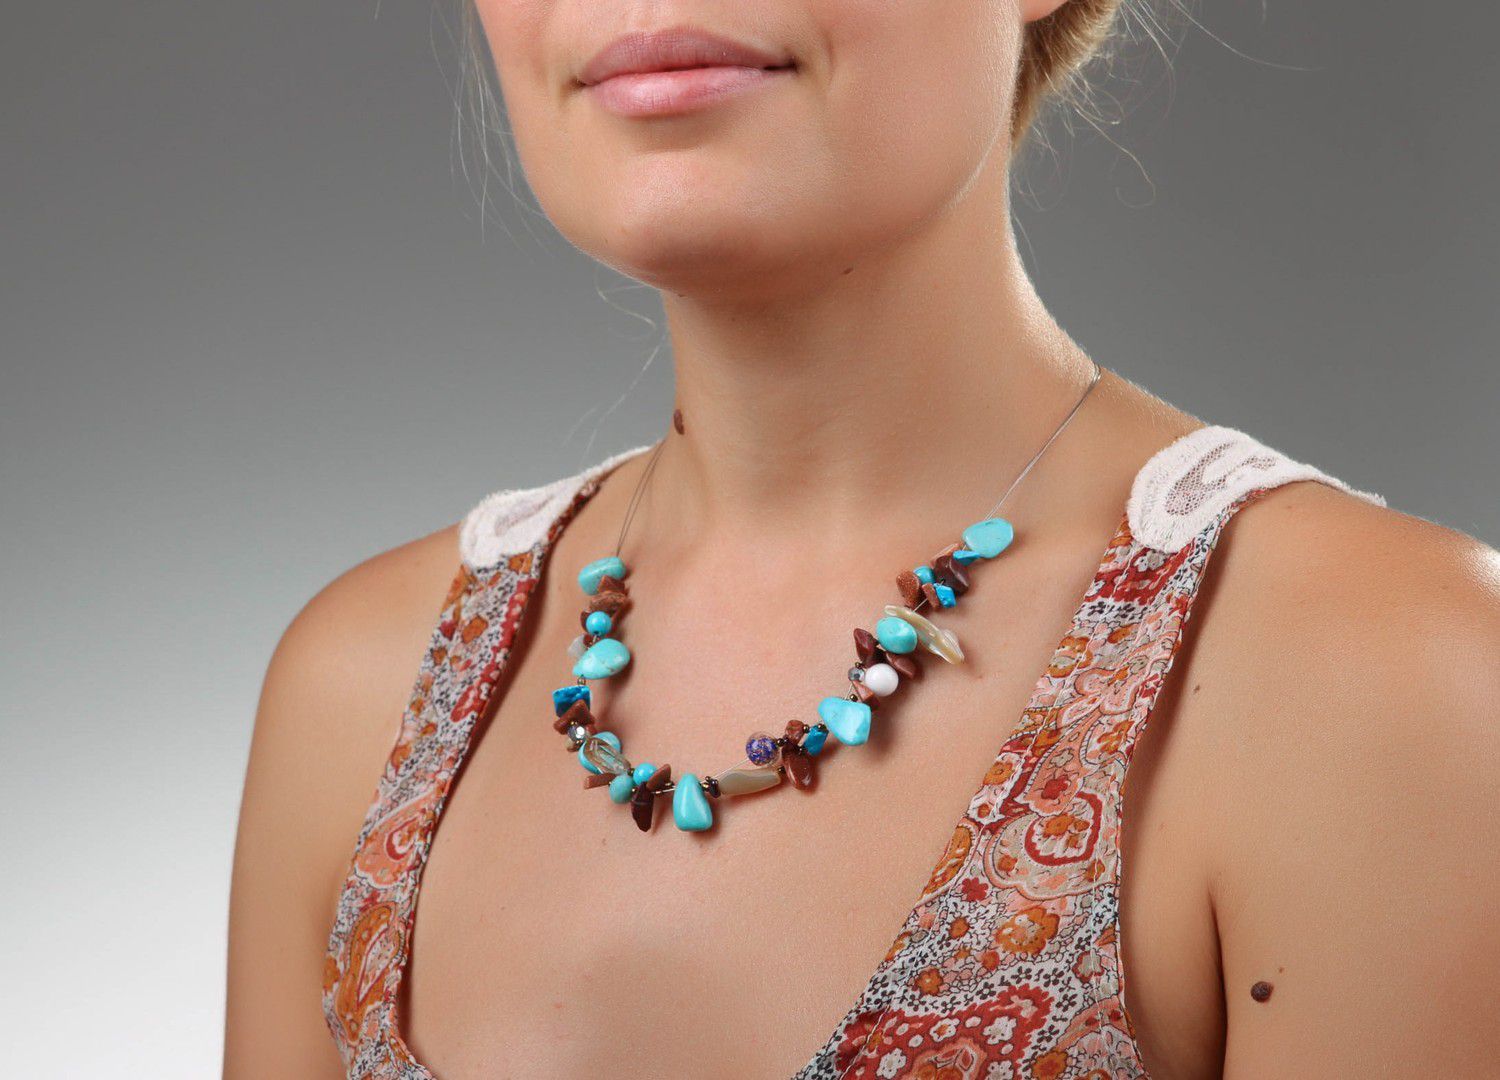 Necklace made of colorful natural stones photo 3